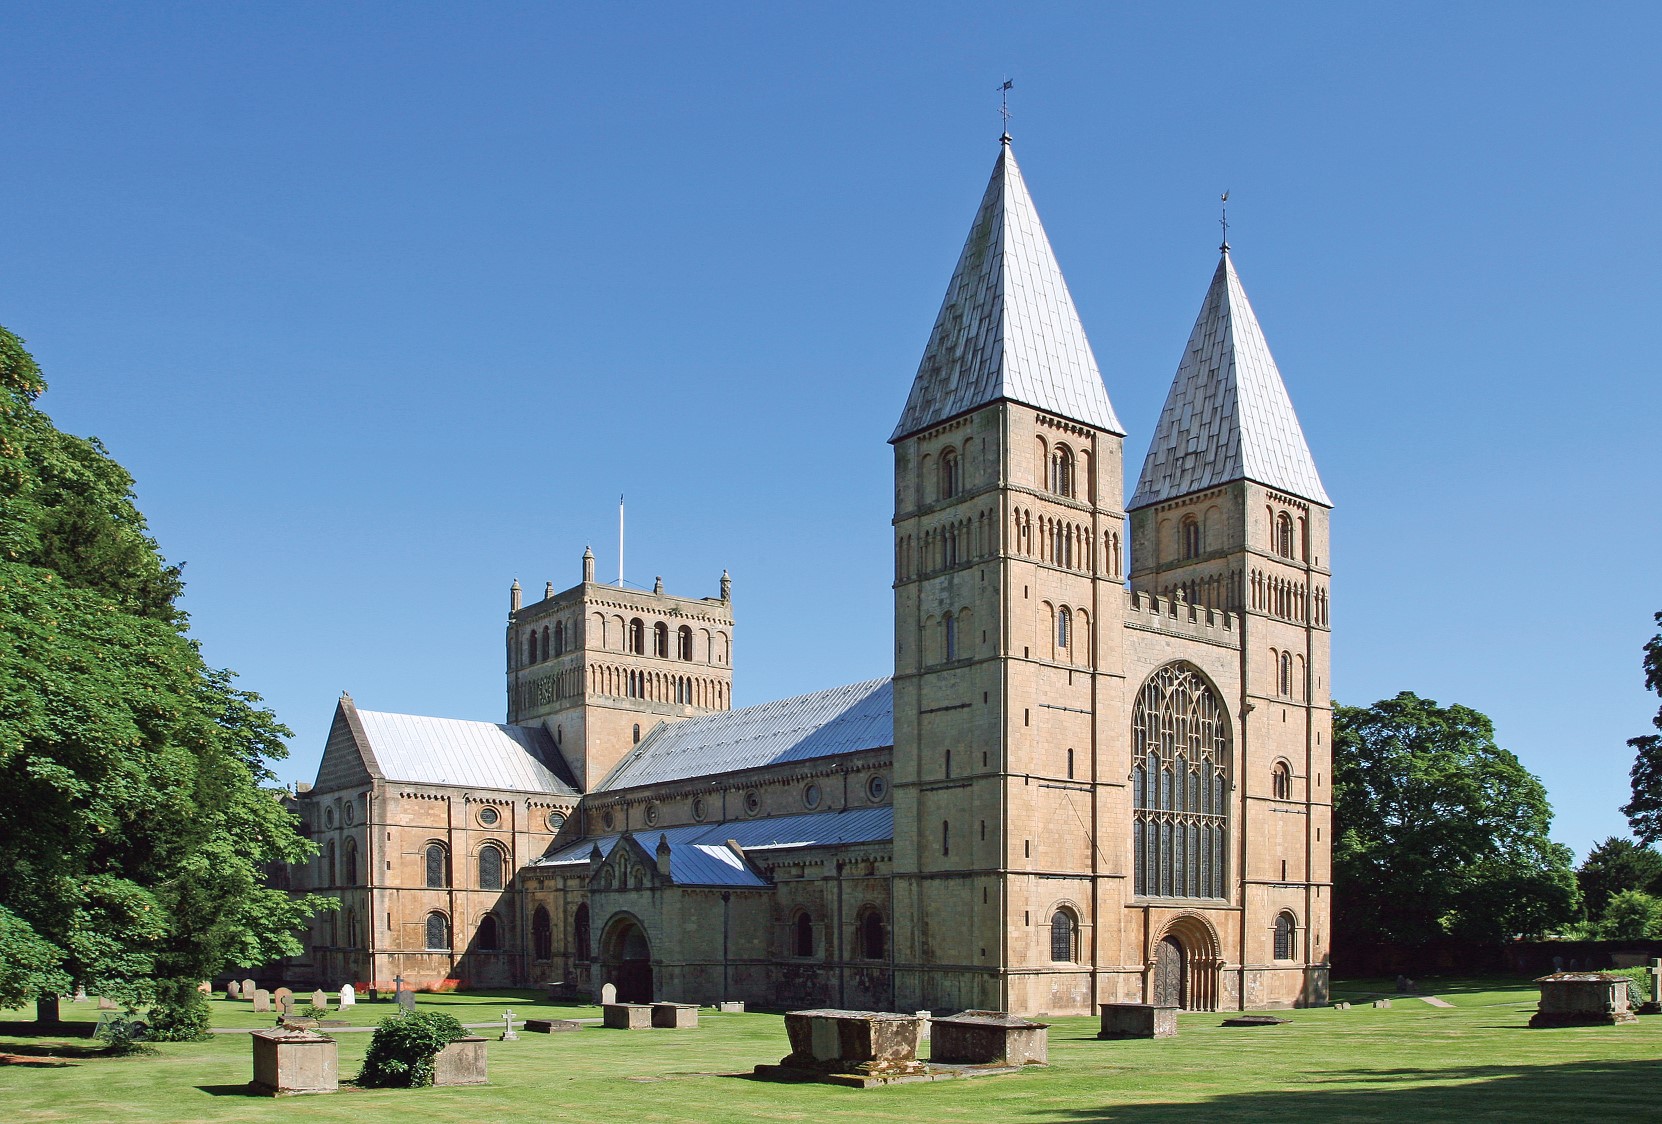 Updates from Southwell Minster for this week